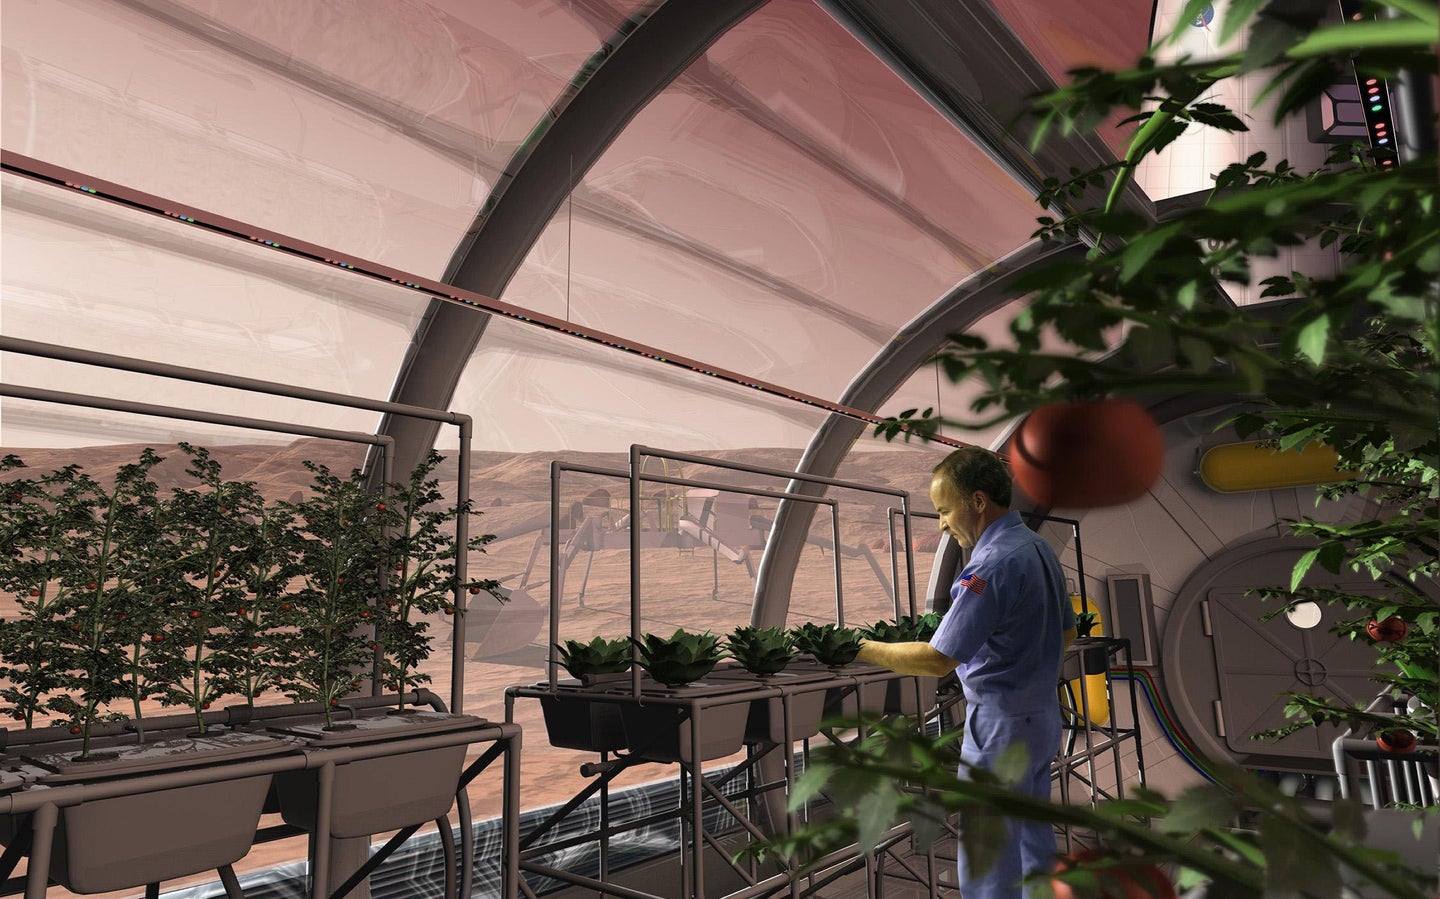 Long-term settlements on Mars could potentially <a href="https://www.popsci.com/article/technology/crops-grow-fake-moon-and-mars-soil/">grow their own food</a>.